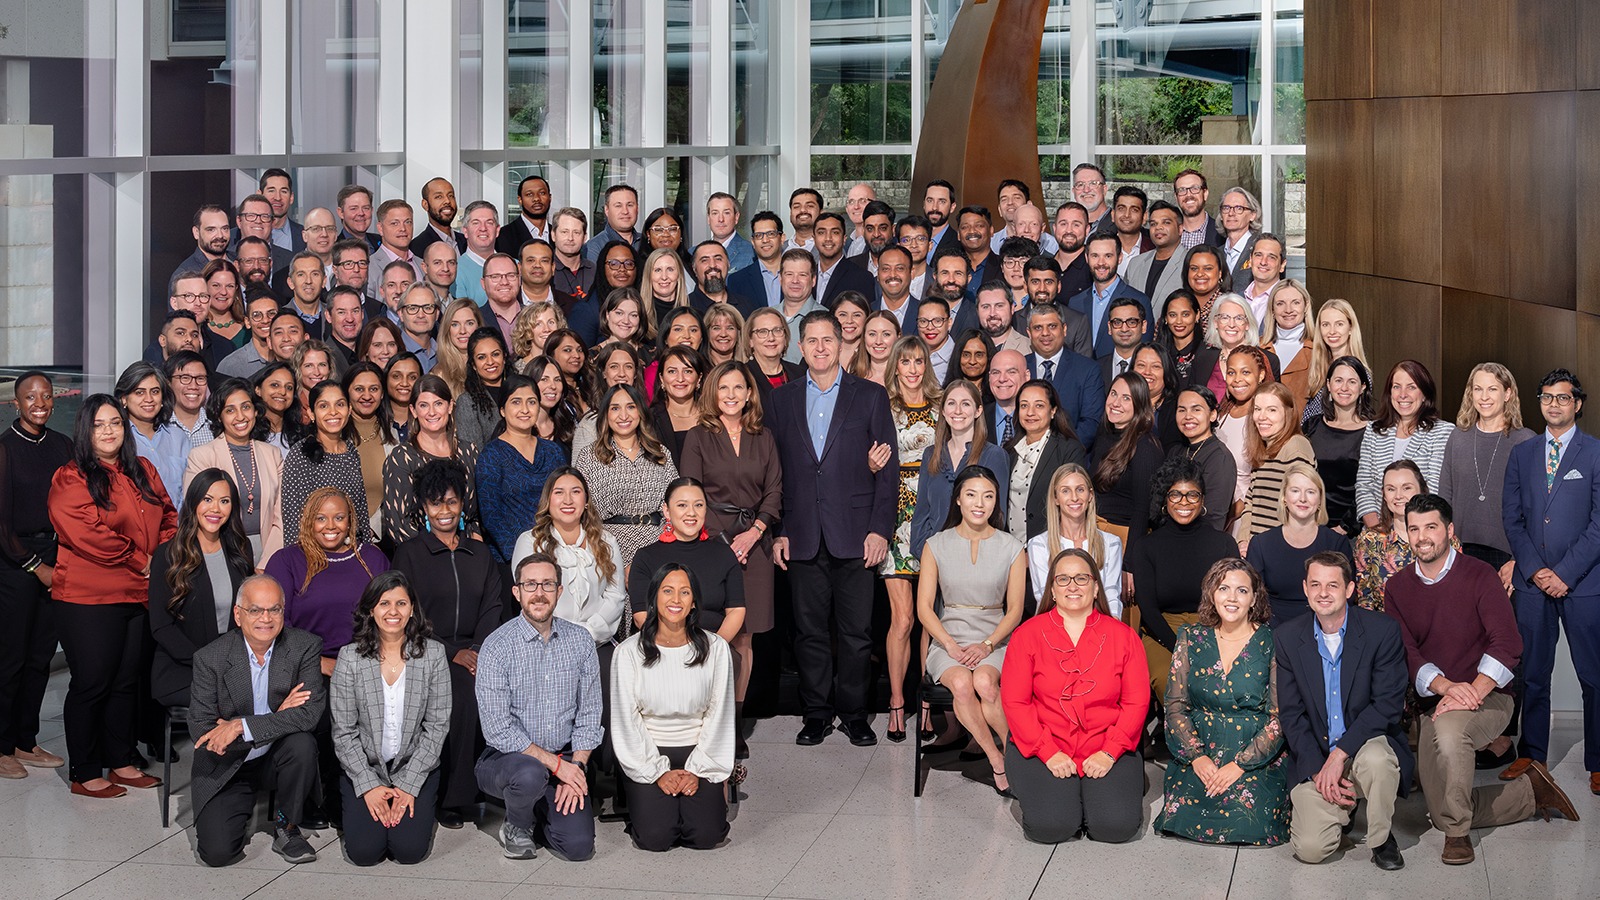 Group portrait of the Dell Foundation's global team.